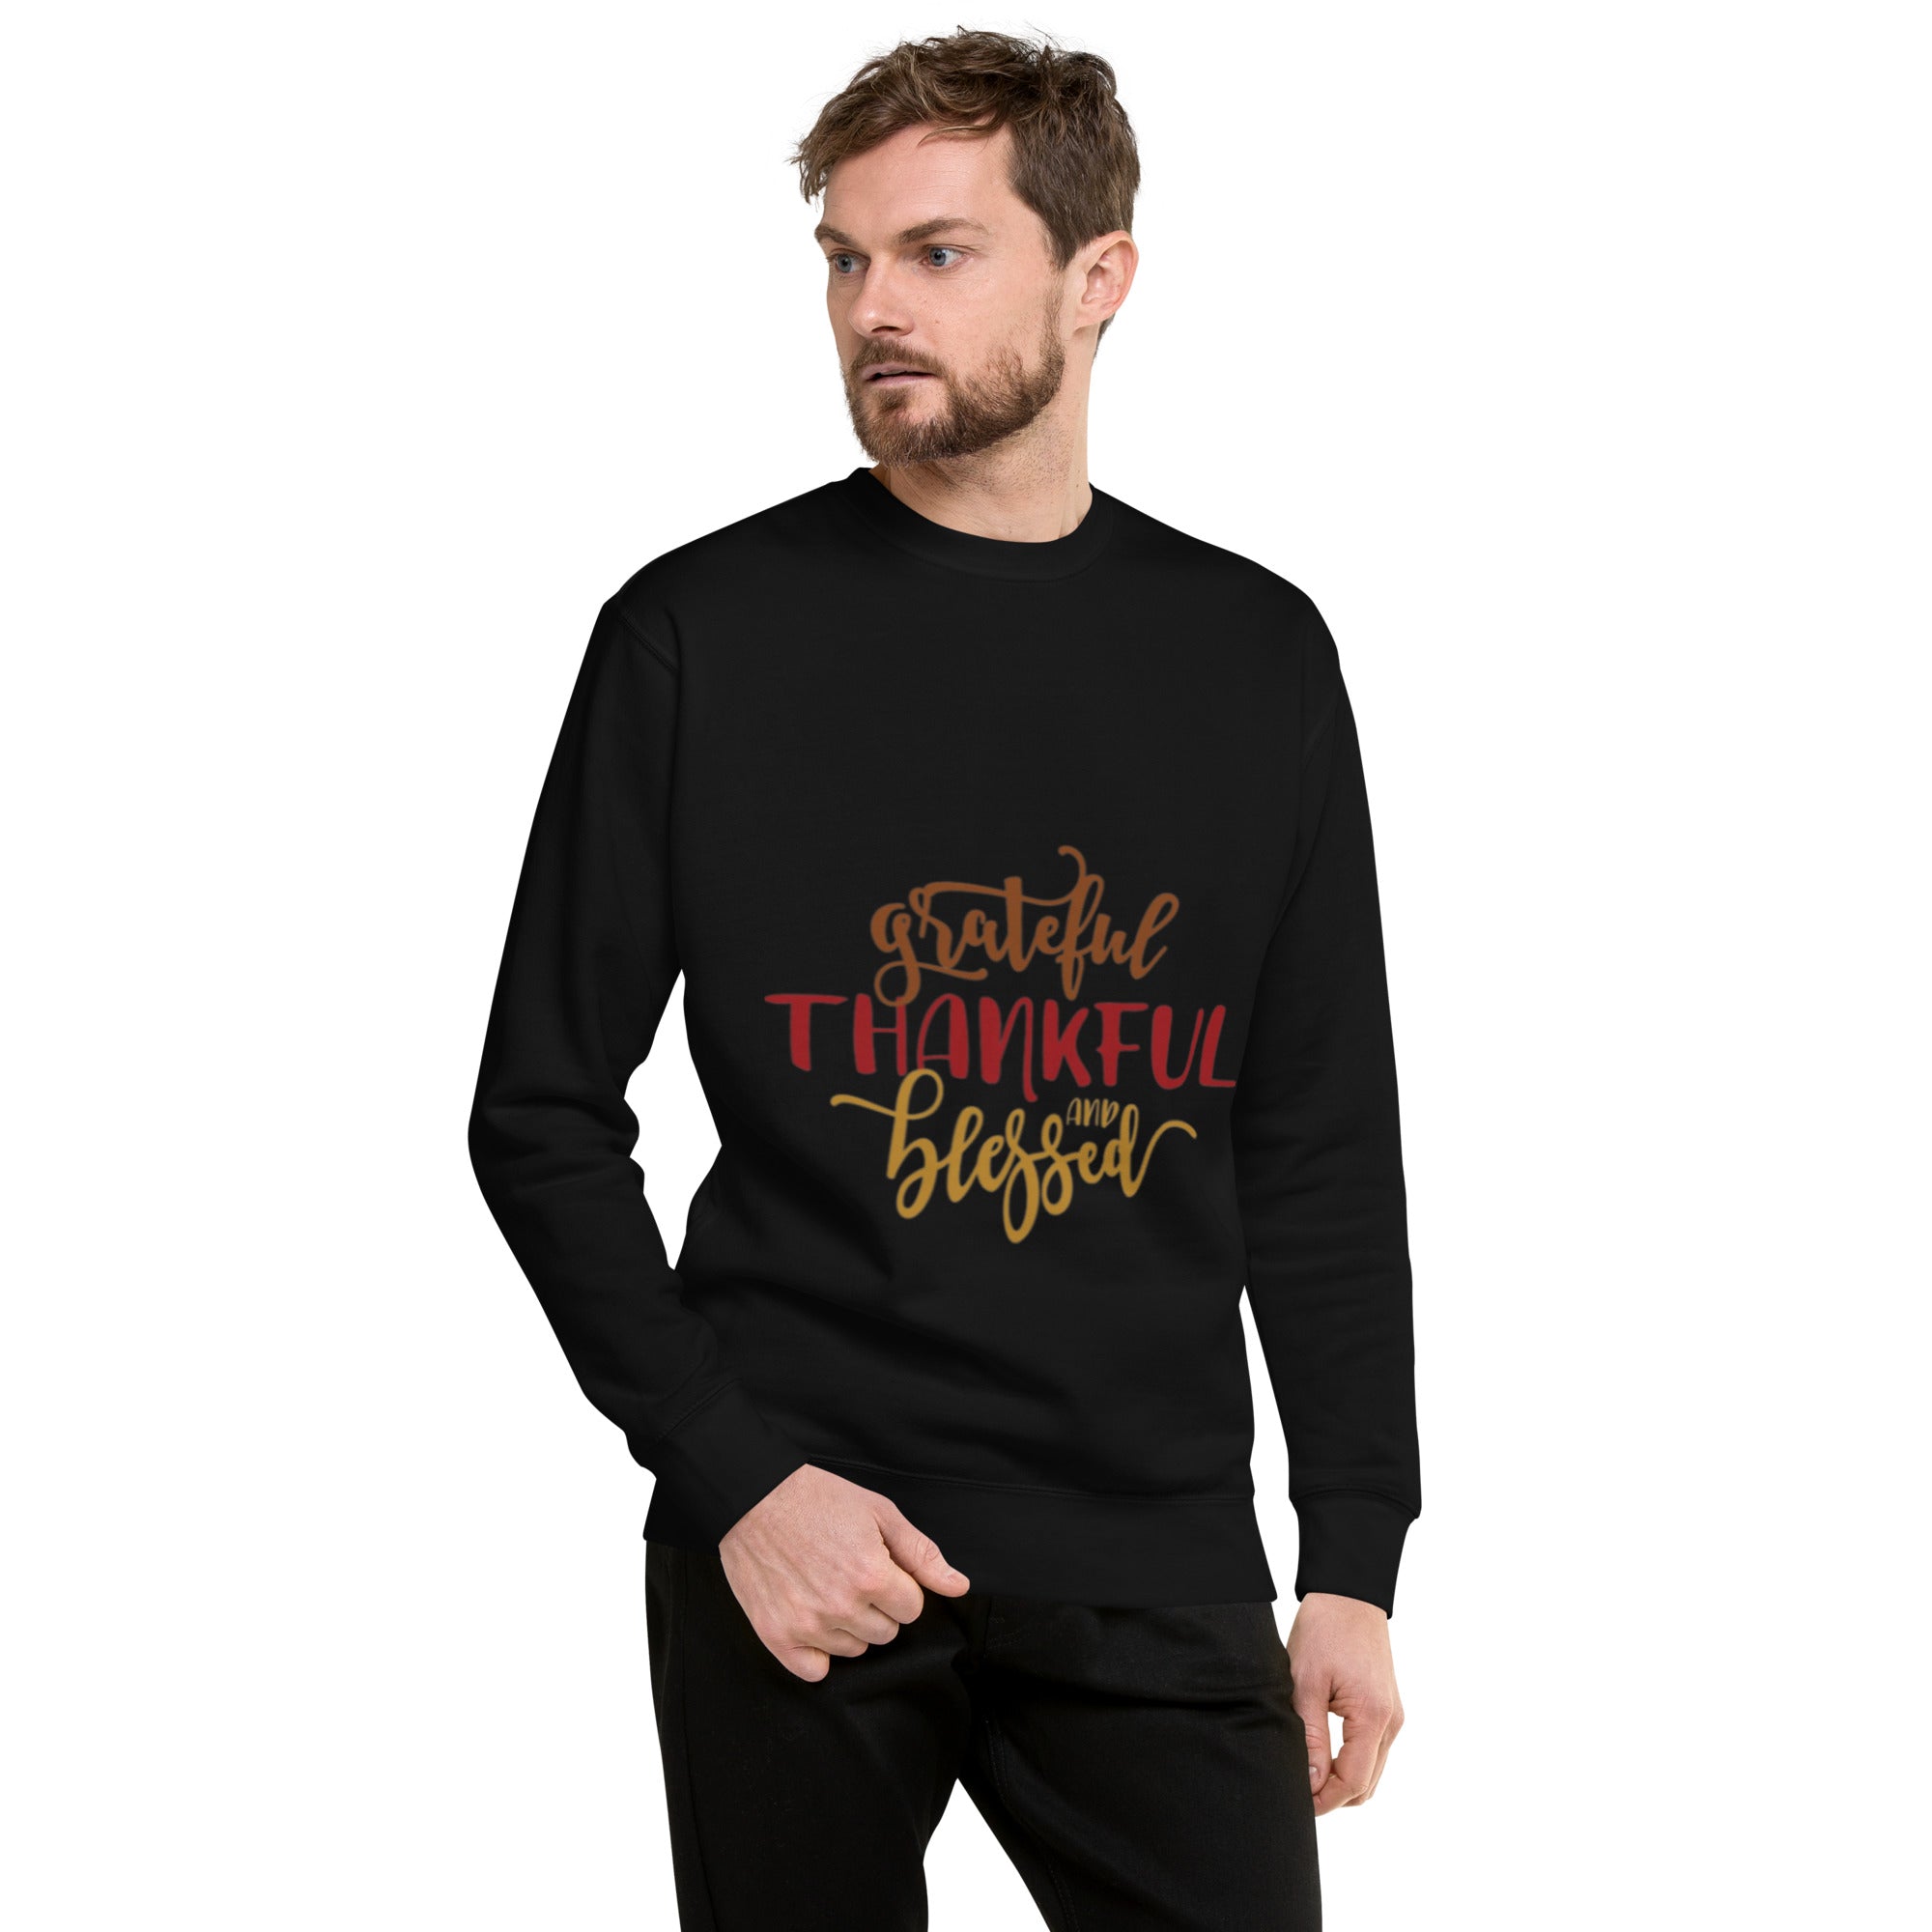 Buy Give Thanks With A Grateful Heart Premium Sweatshirt